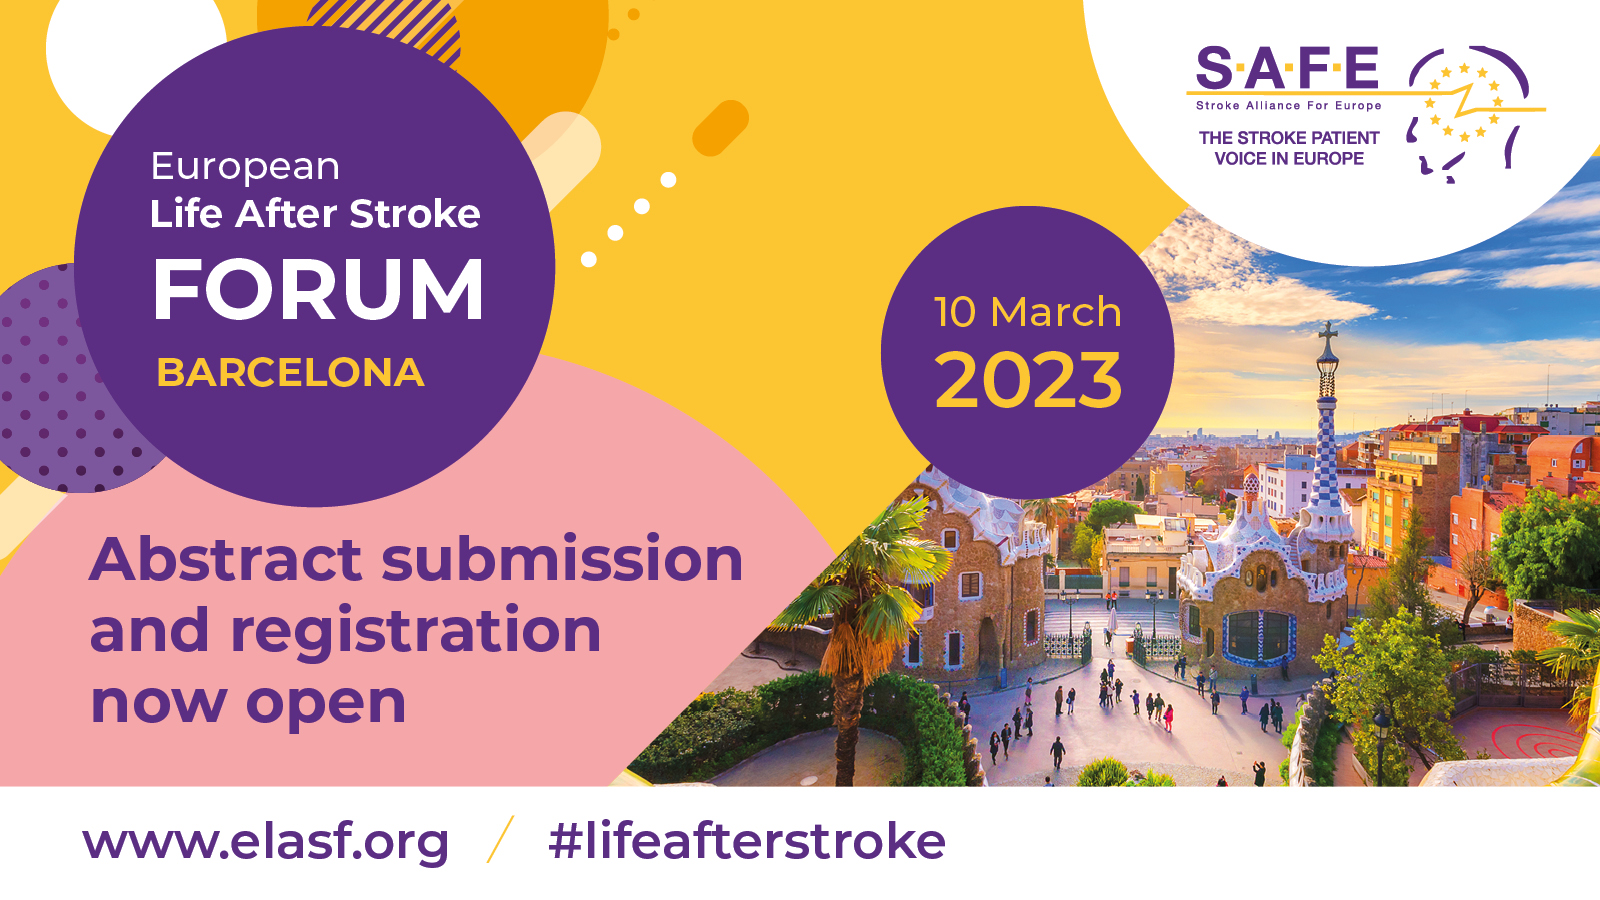 Abstract submission for the European Life After Stroke Forum 10 March 2023, Barcelona, Spain